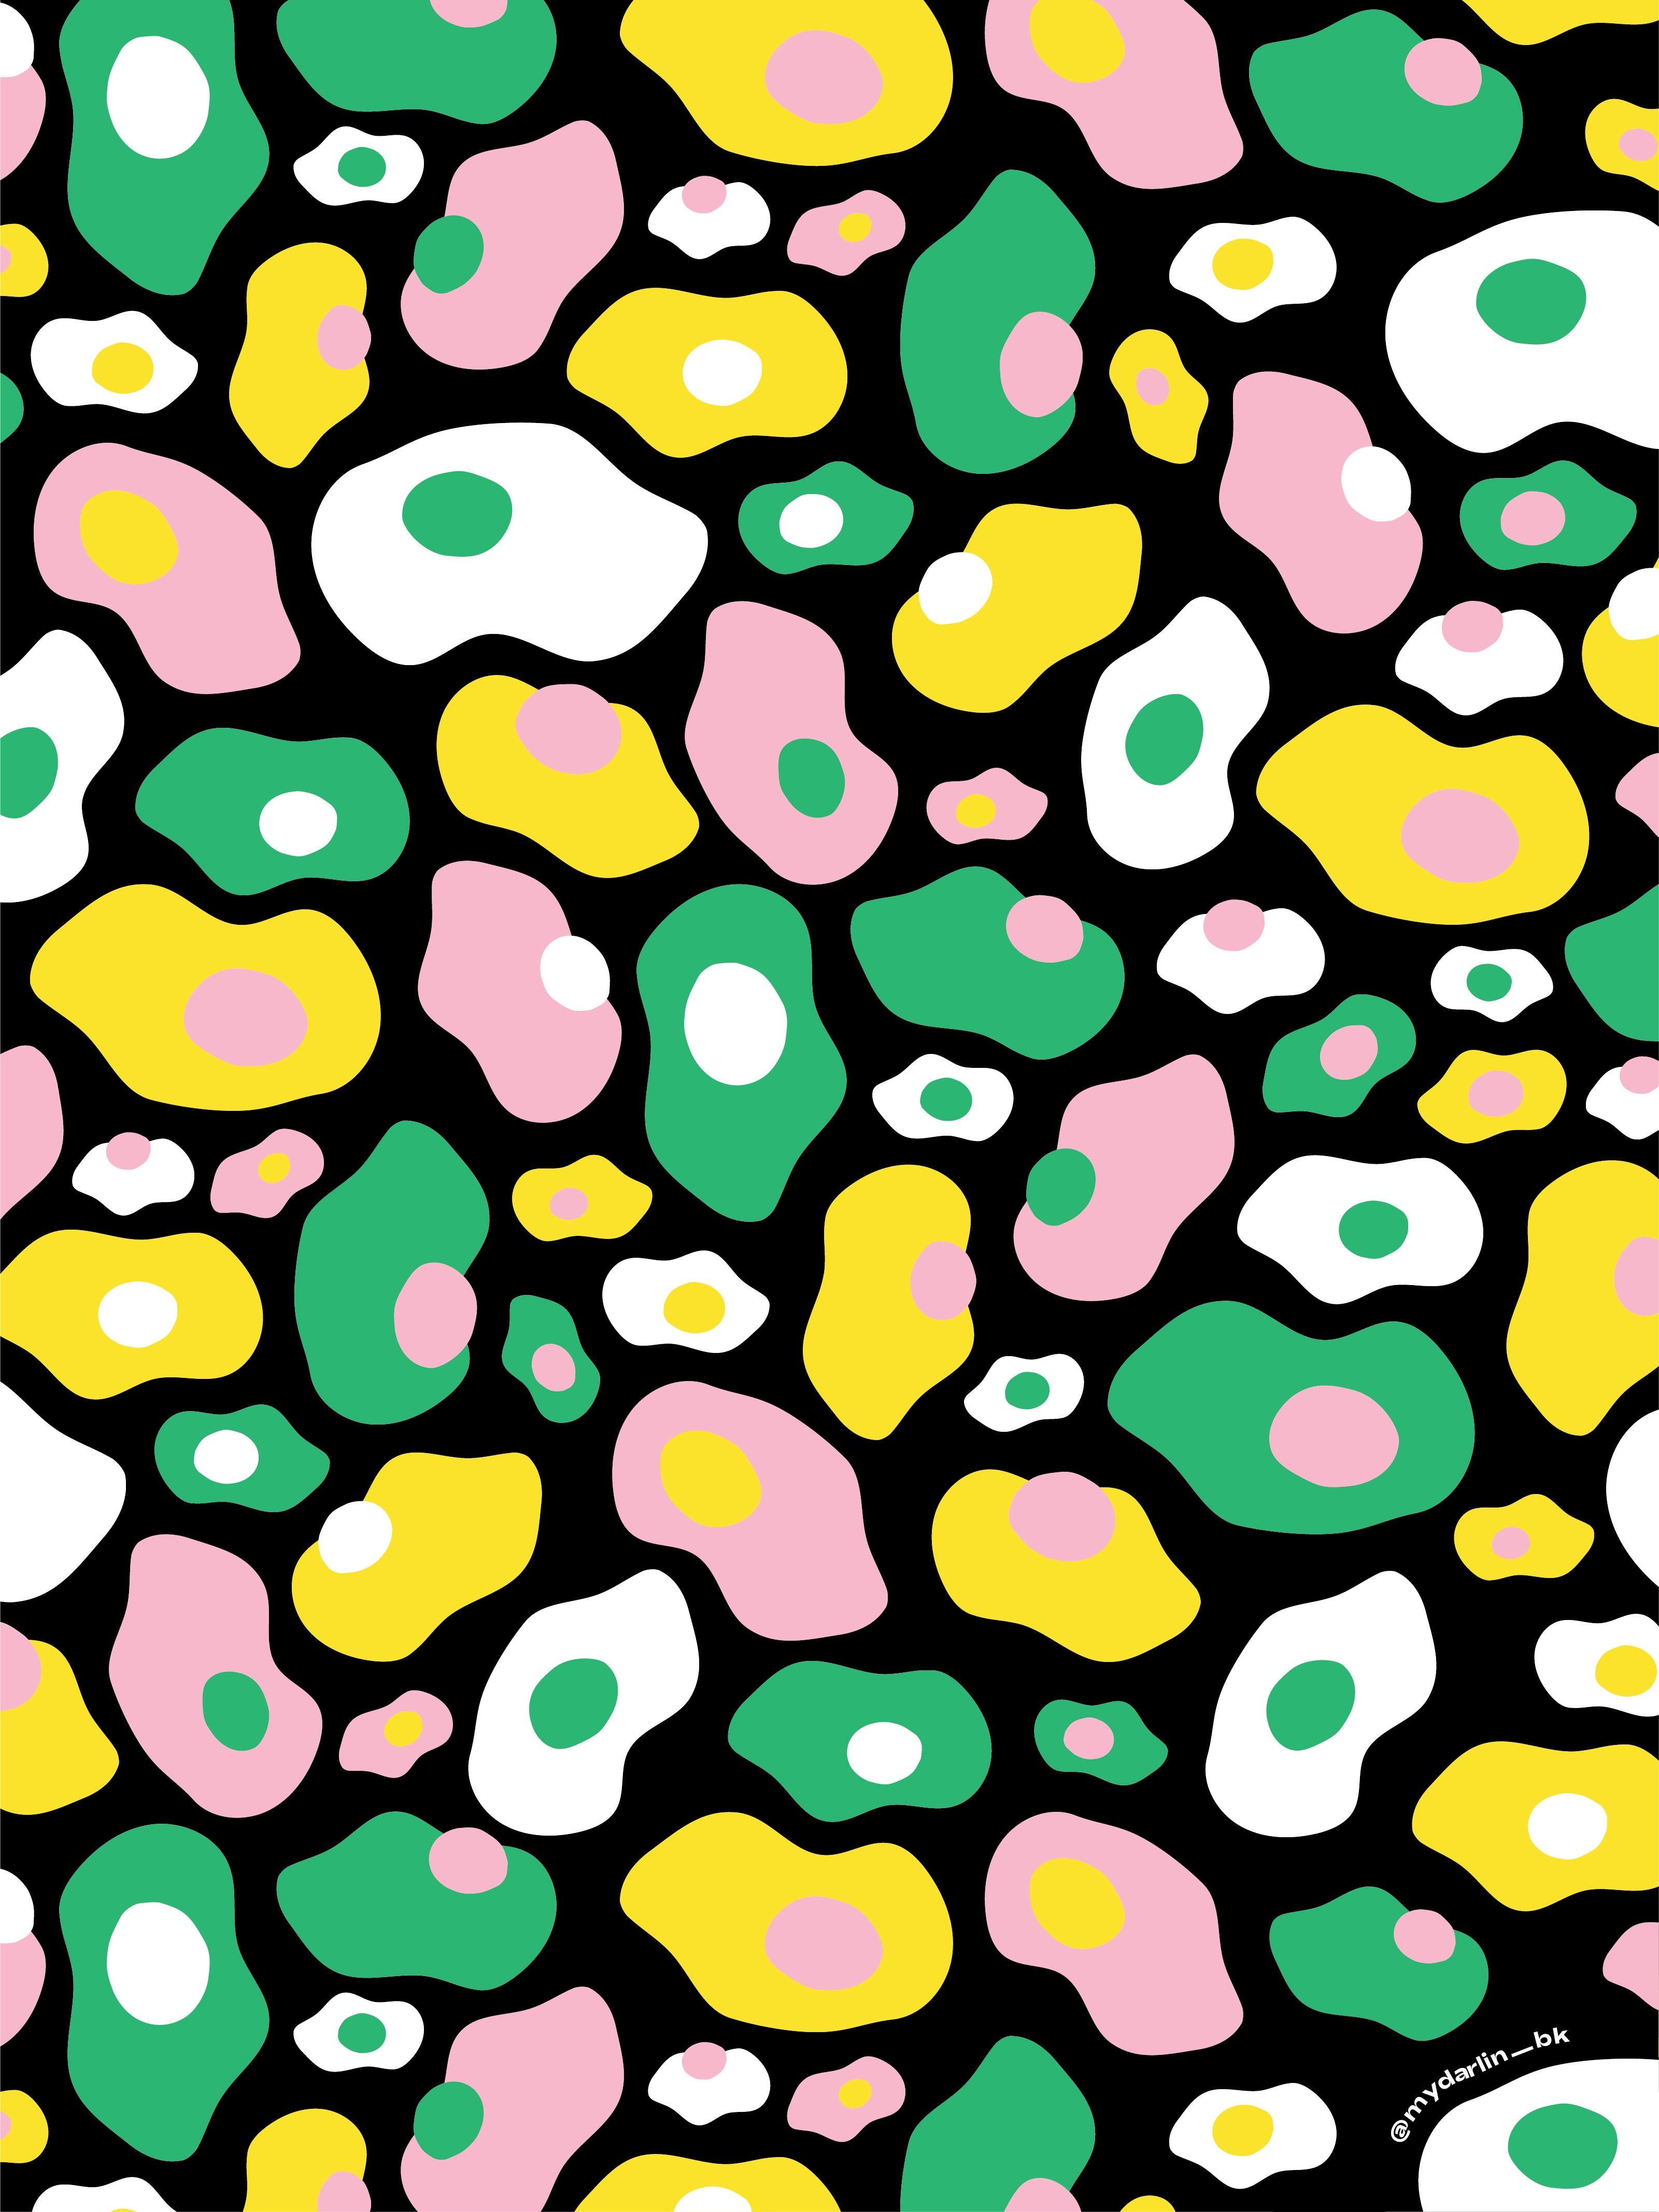 A black wallpaper with green, yellow and pink fried eggs - Psychedelic